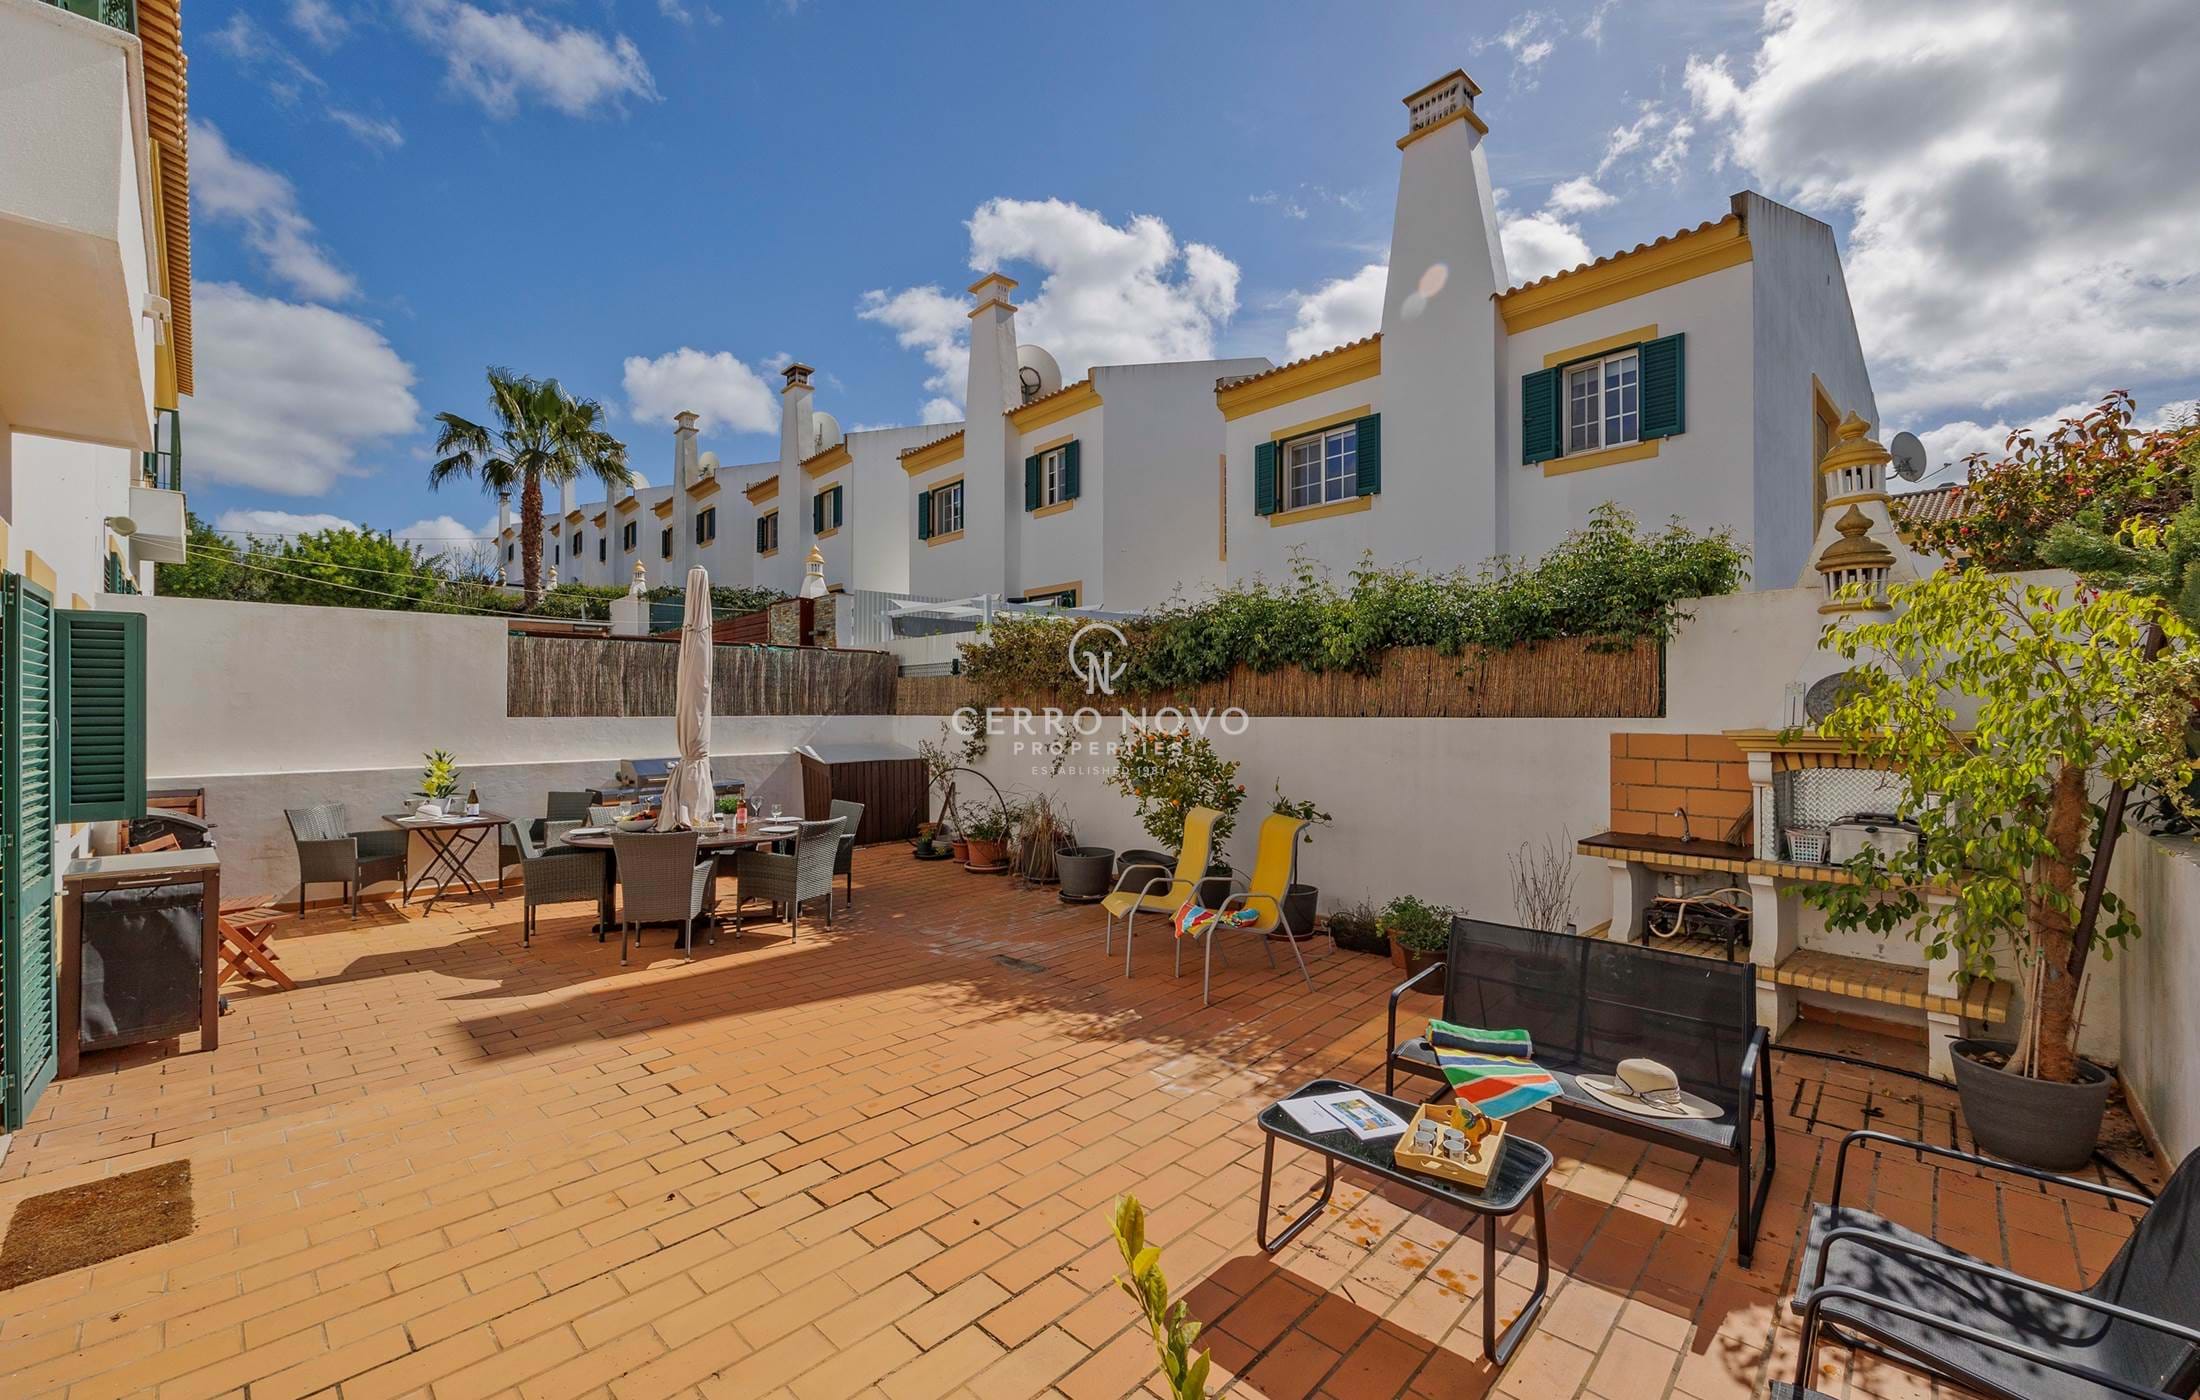  Three bedroom linked villa with garage and communal pool